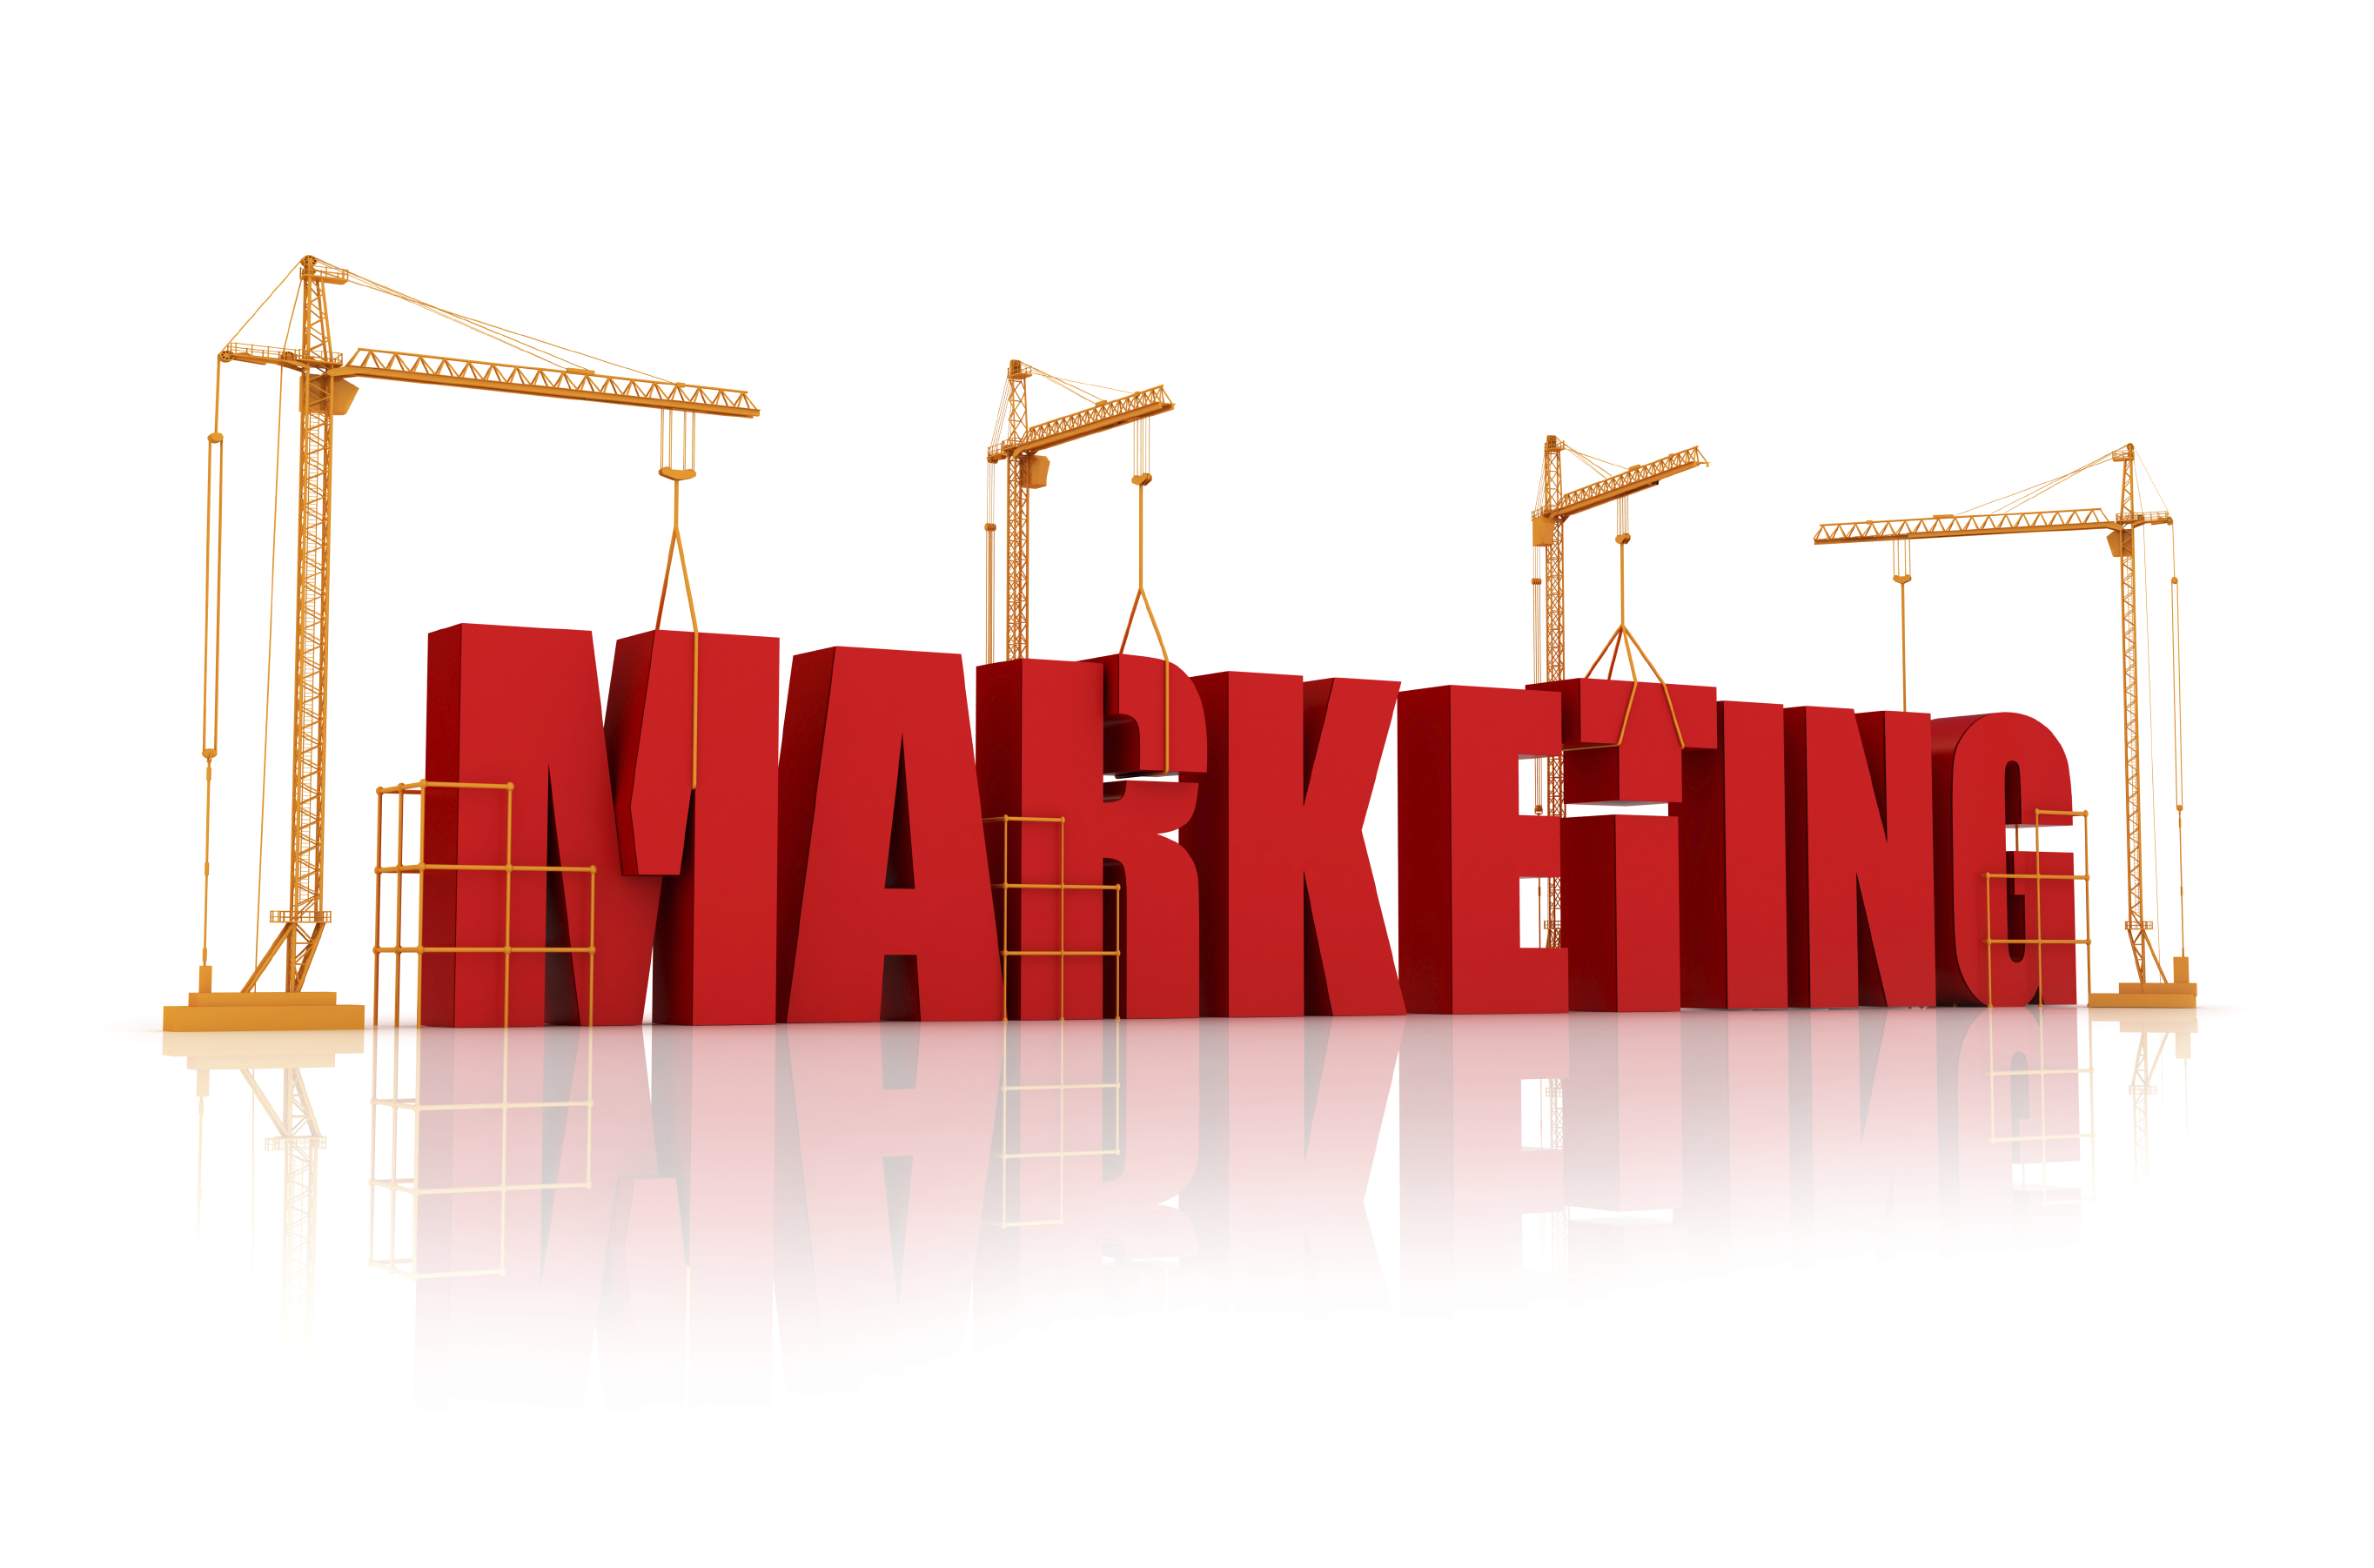 Online marketing - everybody is going to like it